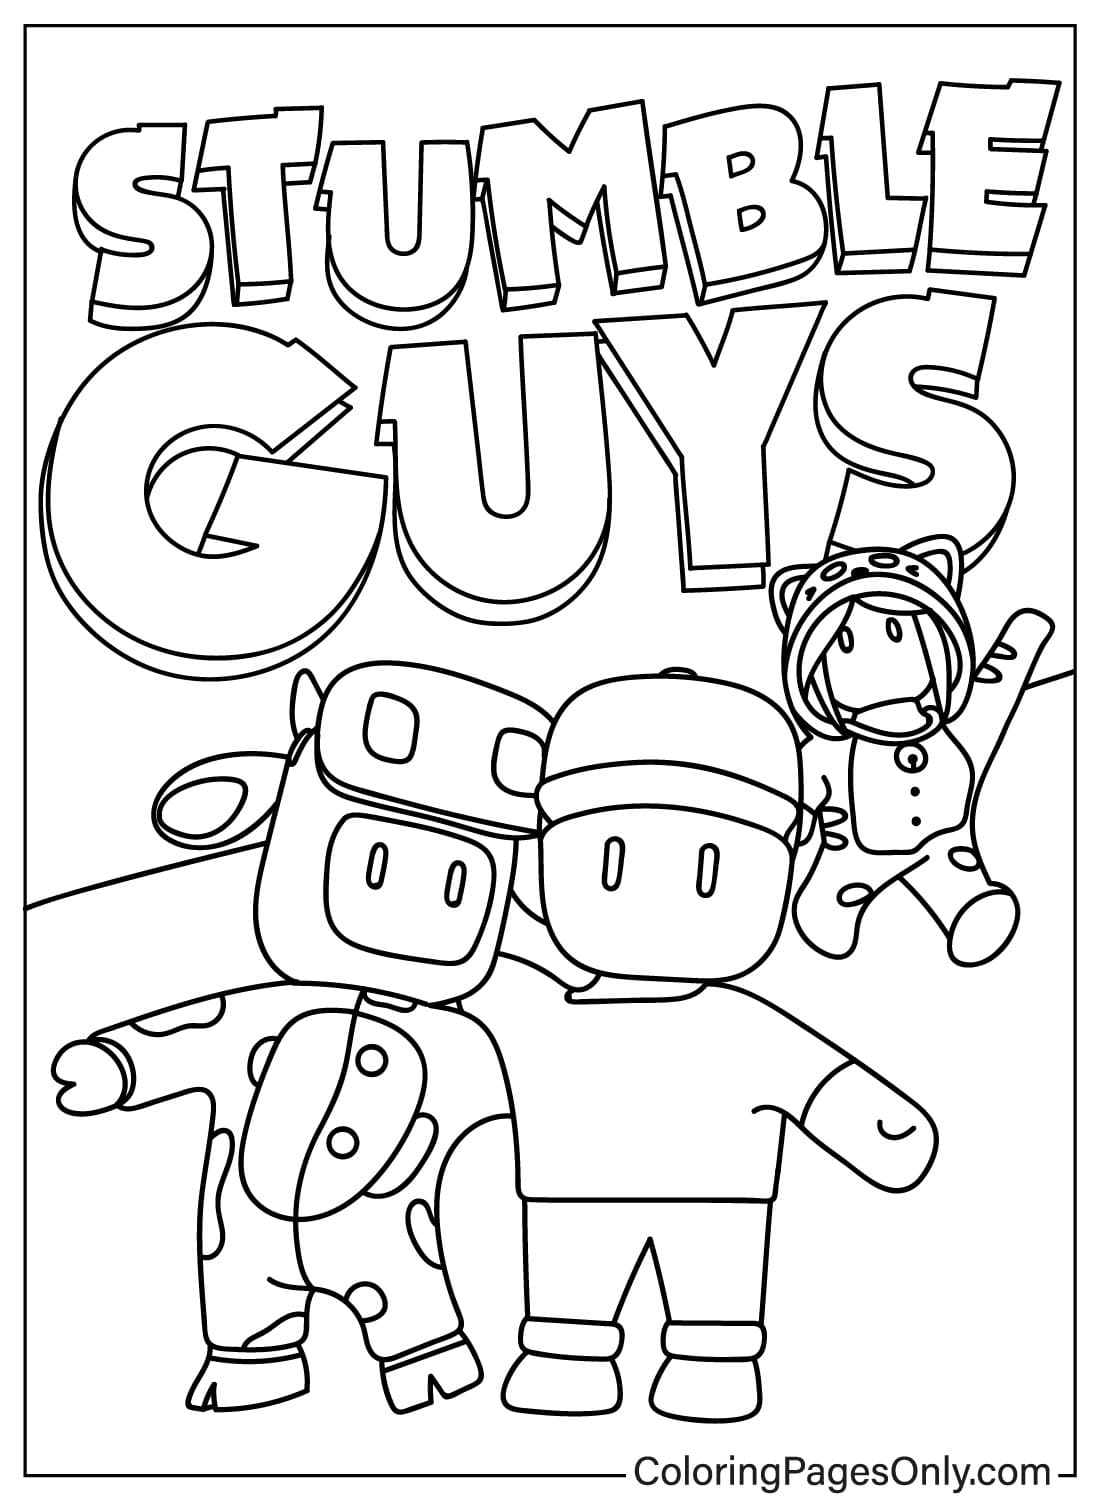 Stumble Guys Printable Coloring Page - Free Printable Coloring Pages